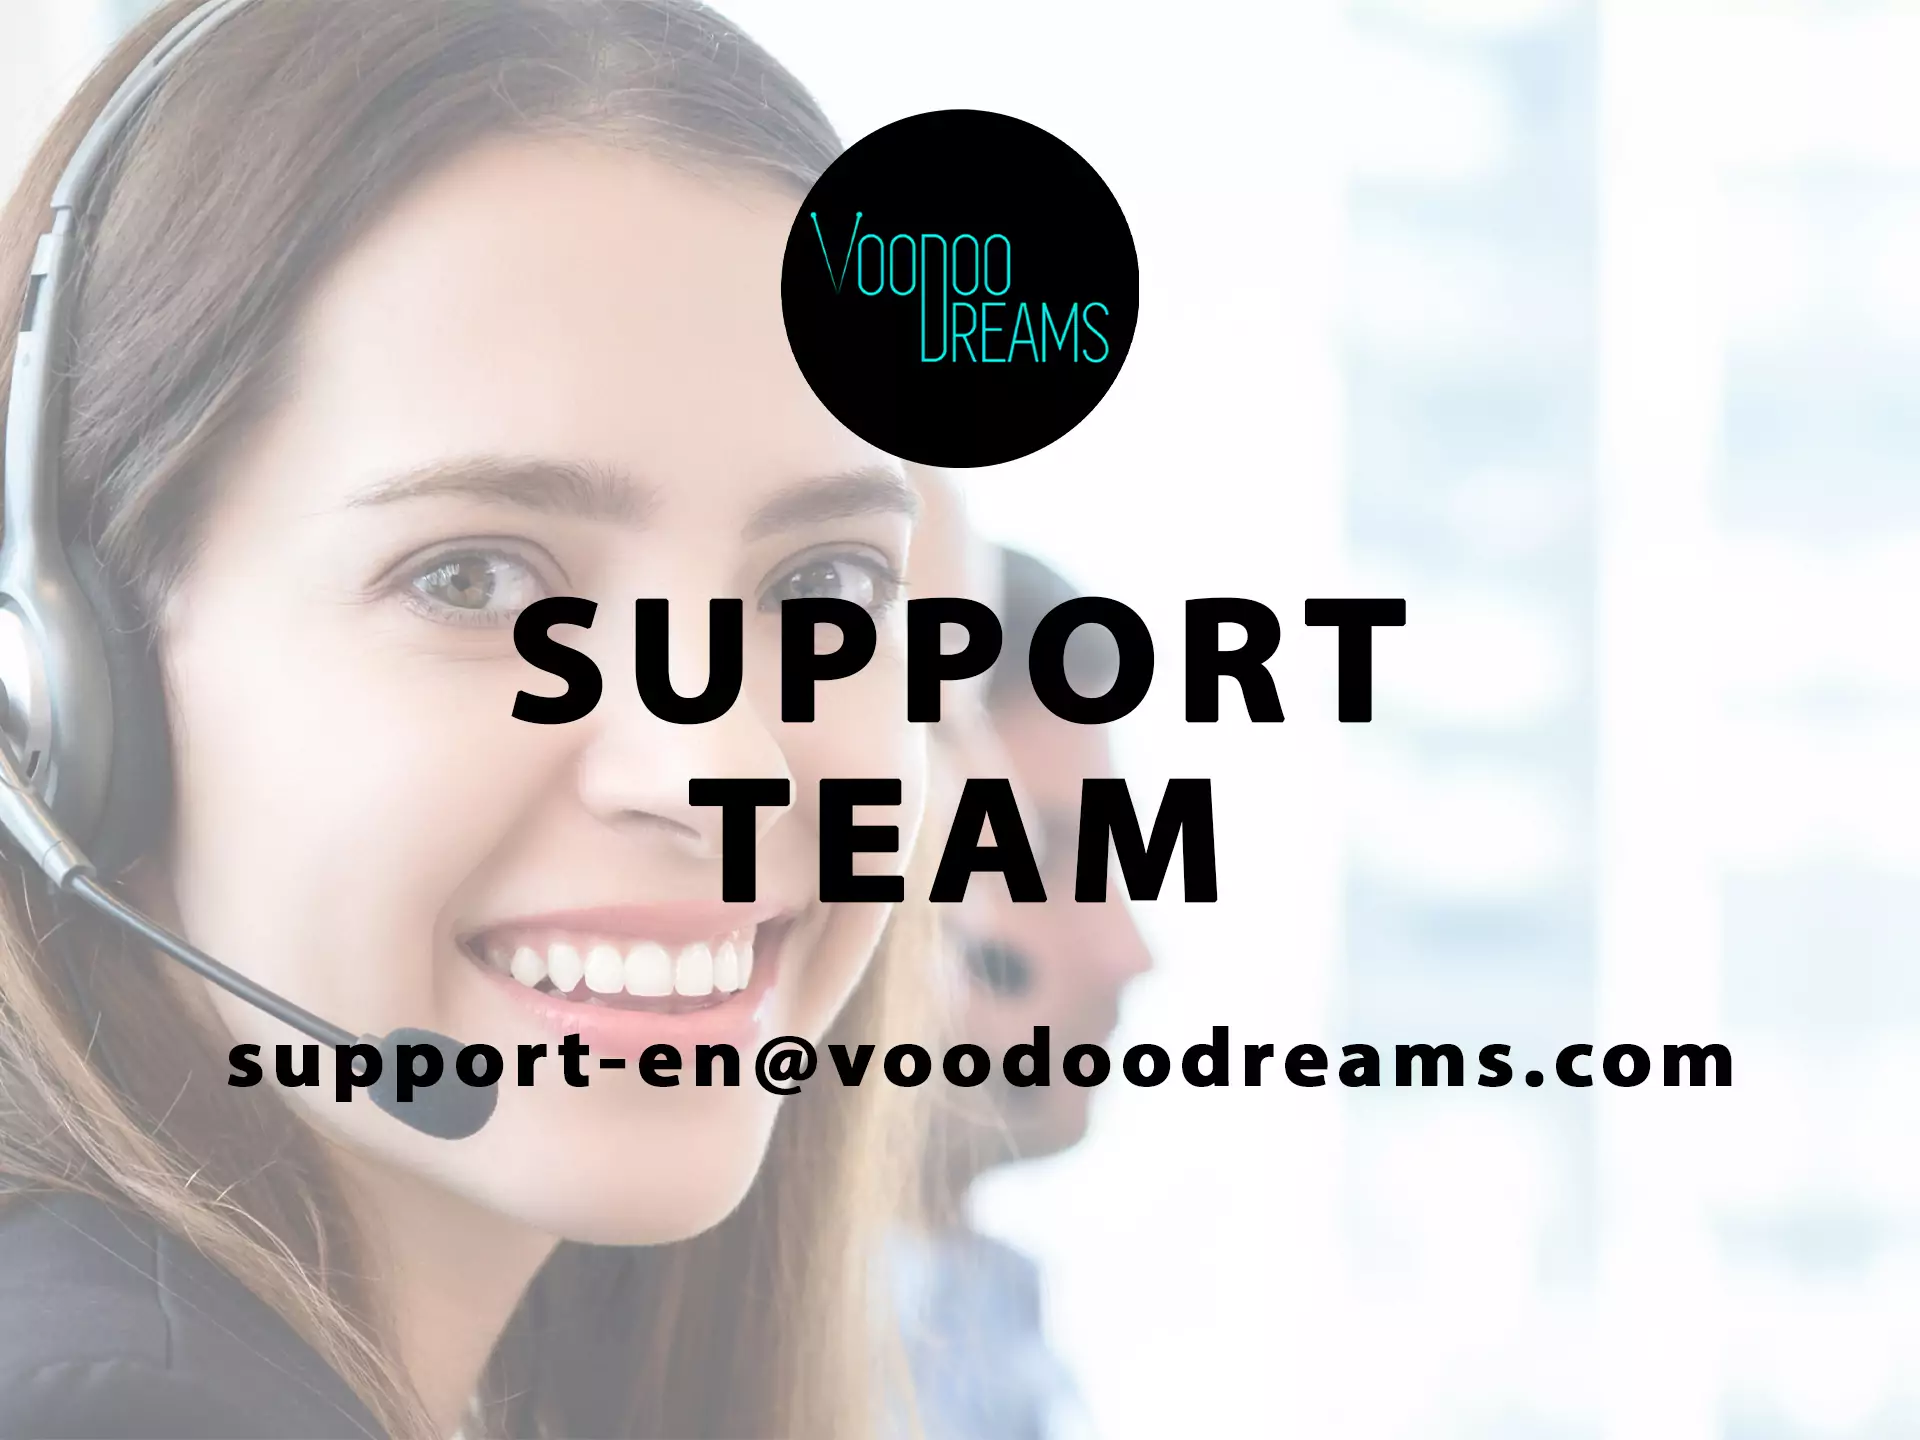 You can always contact the Voodoodreams support teams in case of any problem.